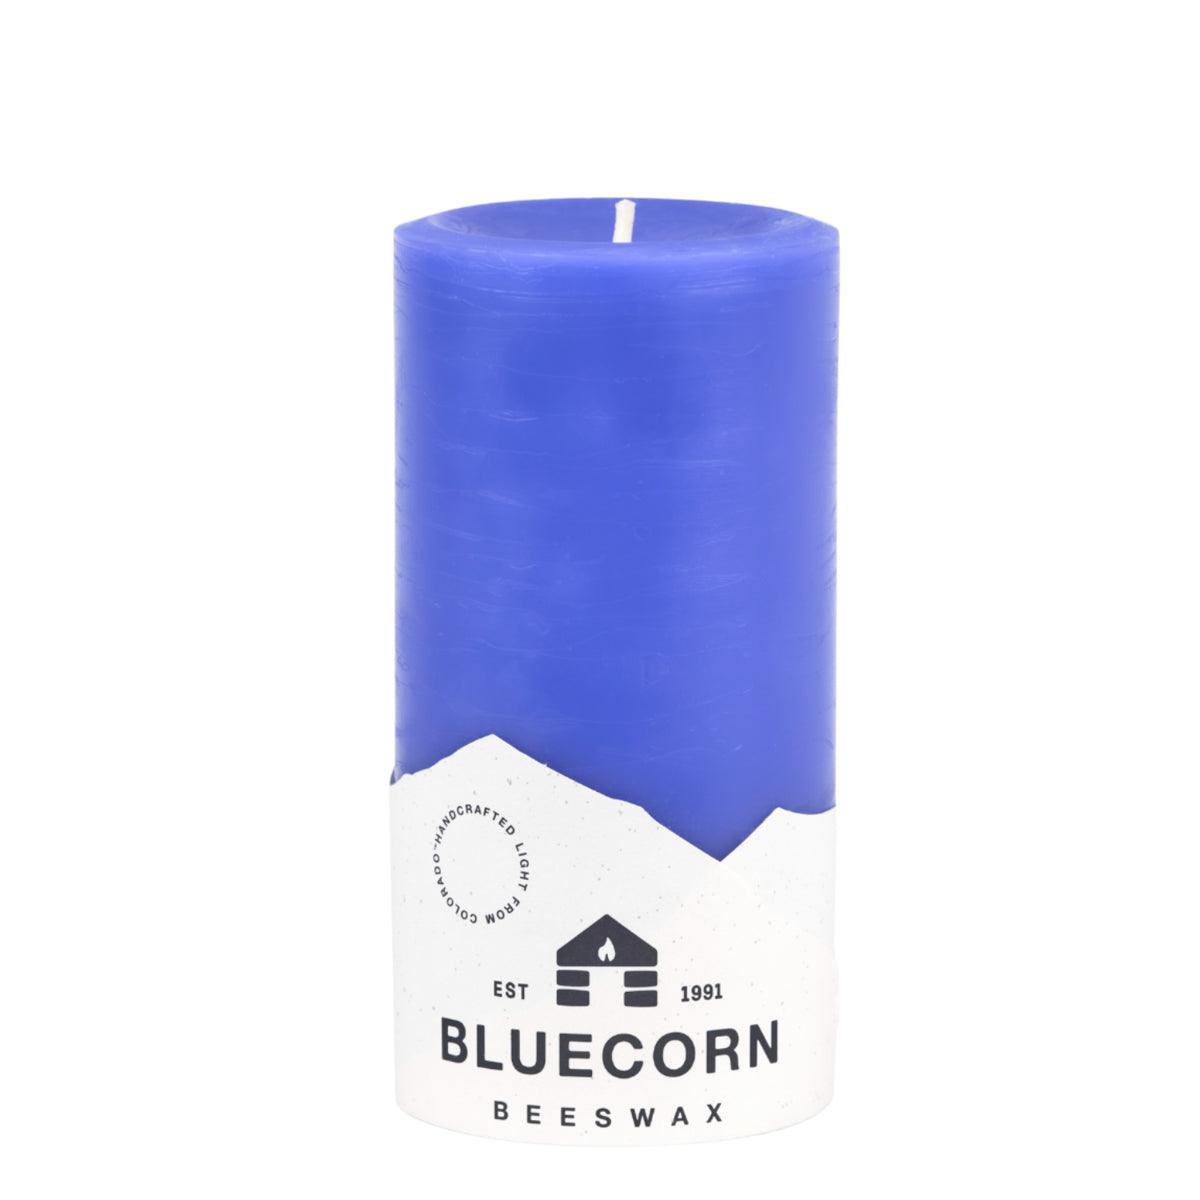 Bluecorn Beeswax 100% Pure Beeswax Pillar Candles | Natural Beeswax  Candles, Unscented Yellow Candles | Soy, Paraffin, & Fragrance Free | 4x4,  120